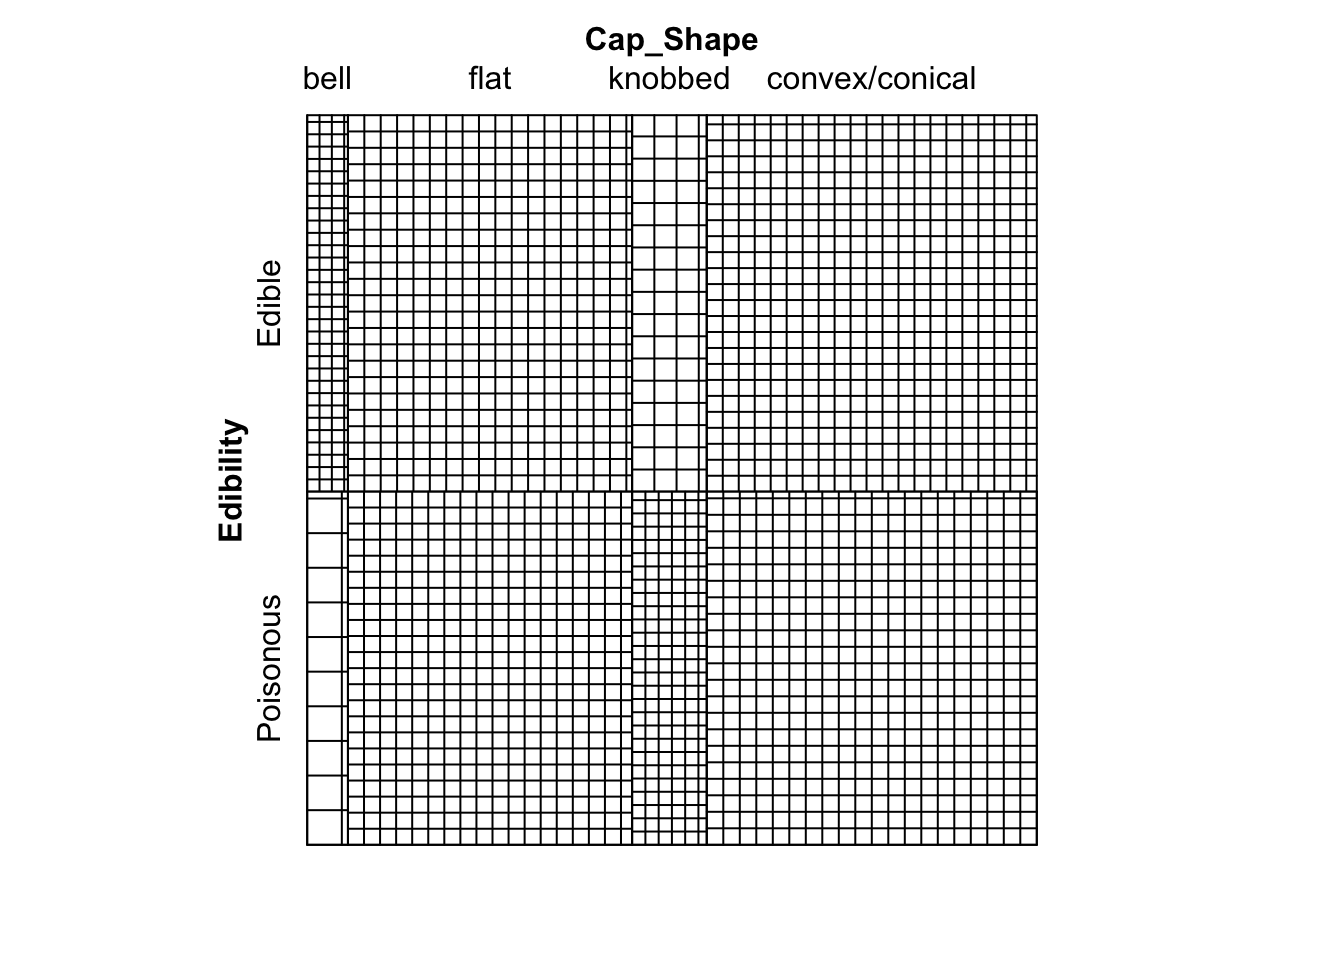 Sieve diagram showing expected-under-independence frequencies for the mushroom data.